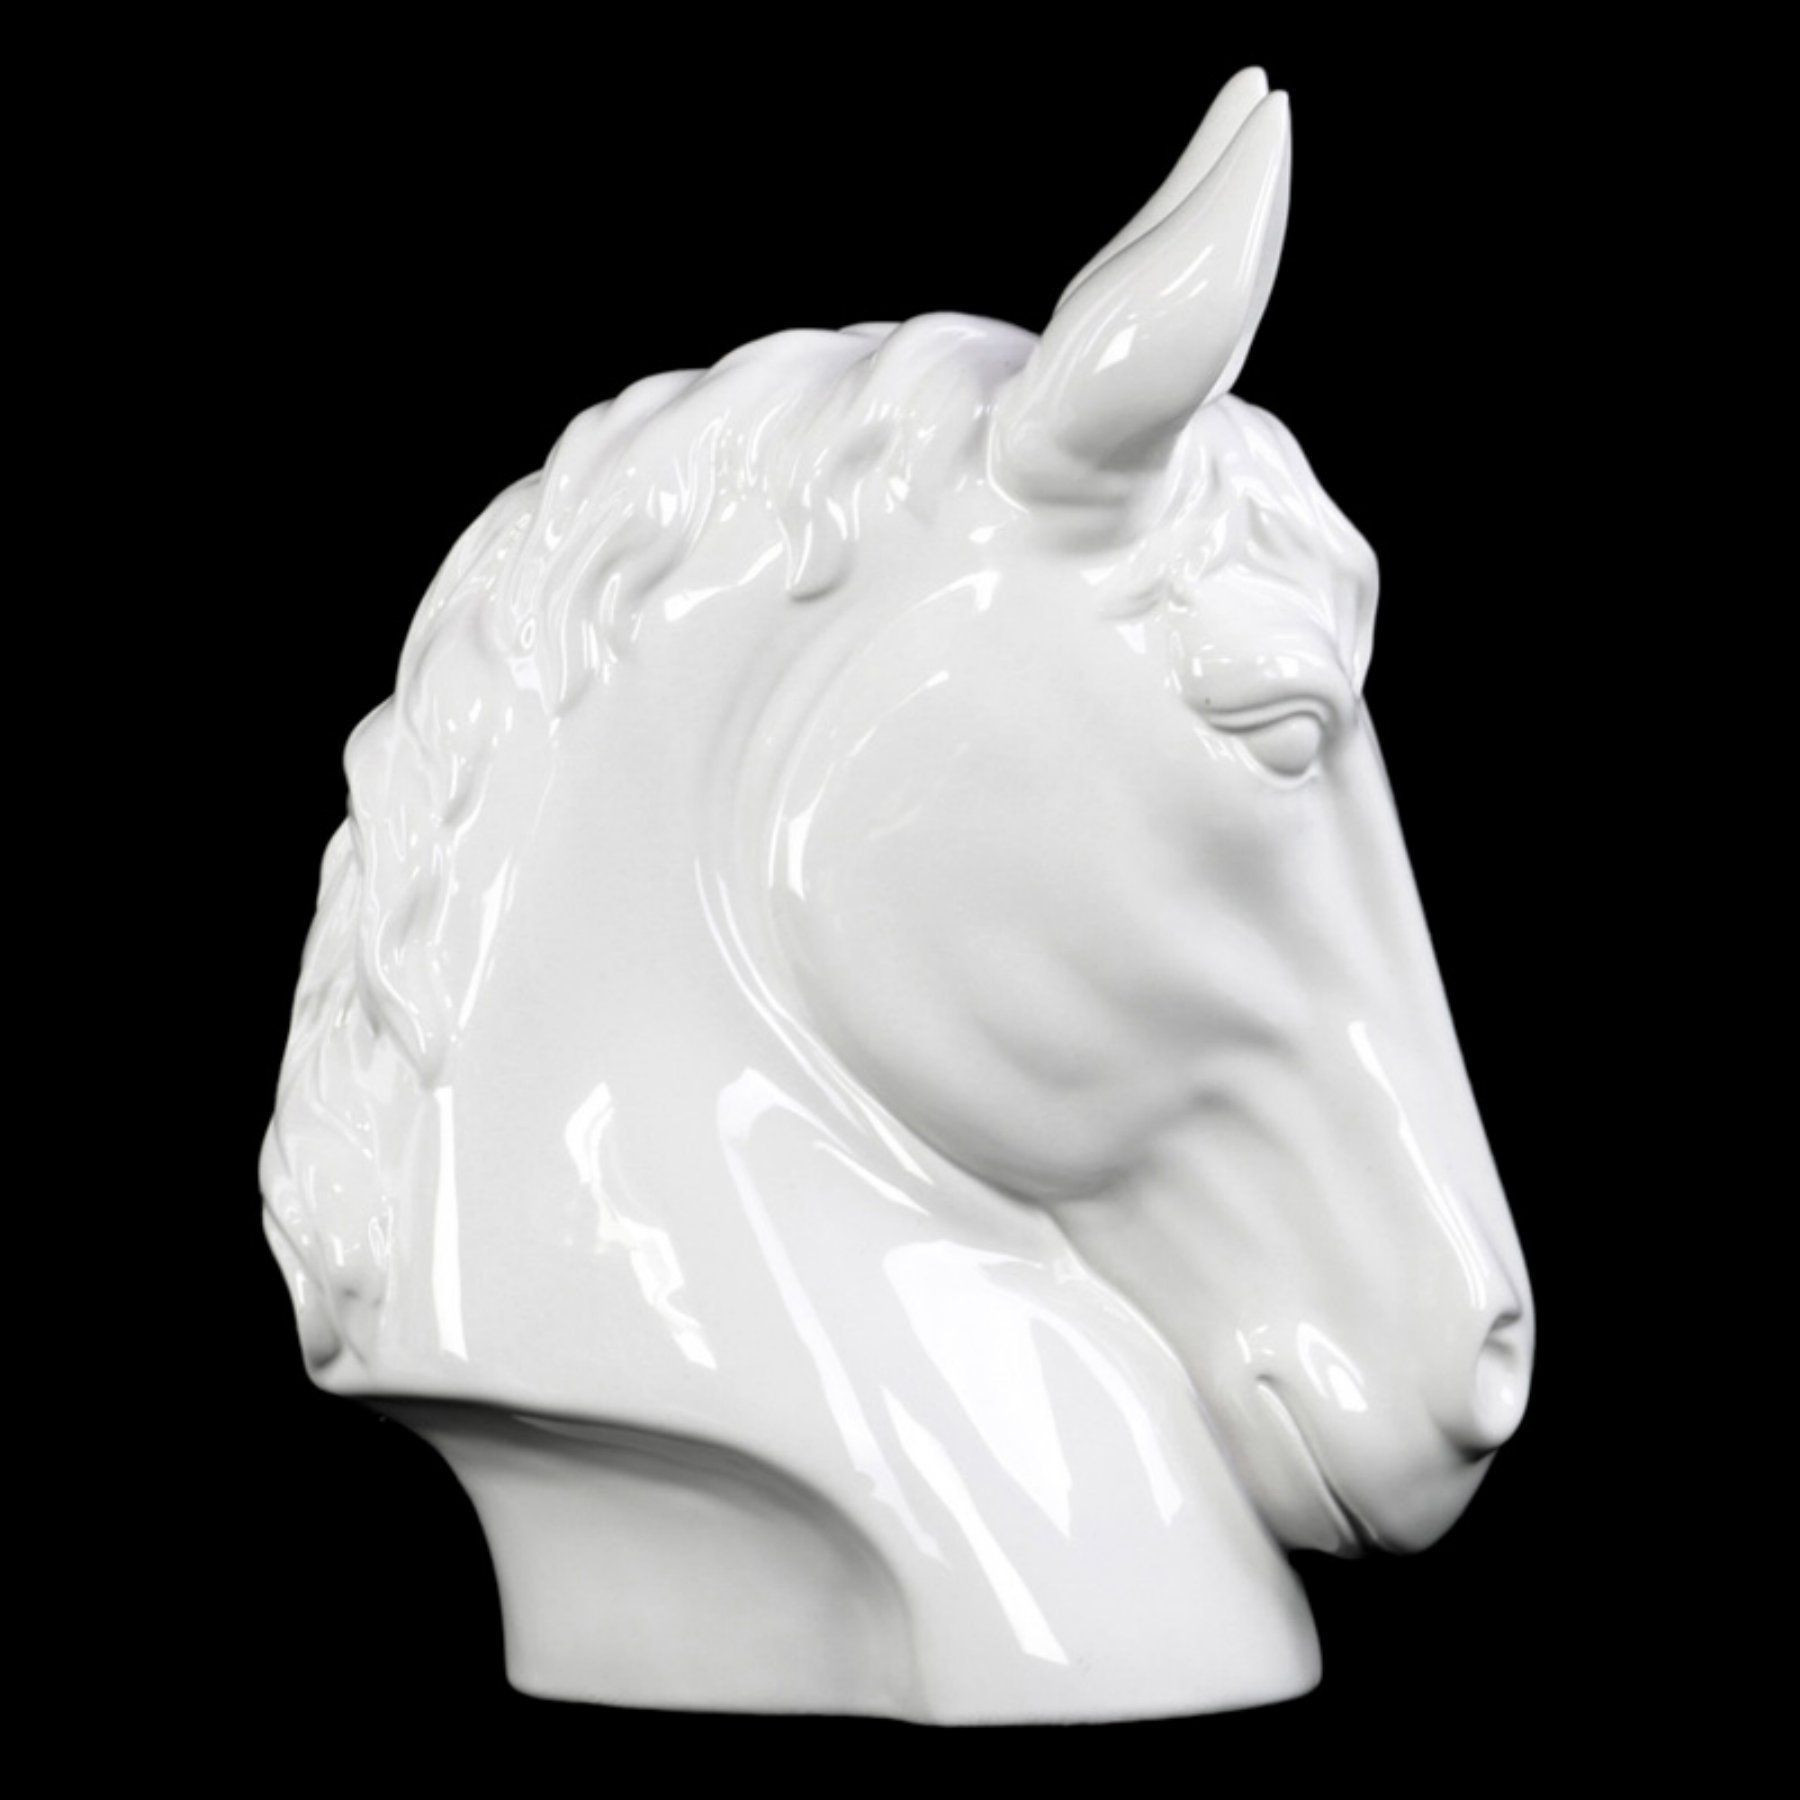 18 Fabulous Horse Head Vase 2024 free download horse head vase of urban trends ceramic horse head sculpture with veins 73214 urban throughout urban trends ceramic horse head sculpture with veins 73214